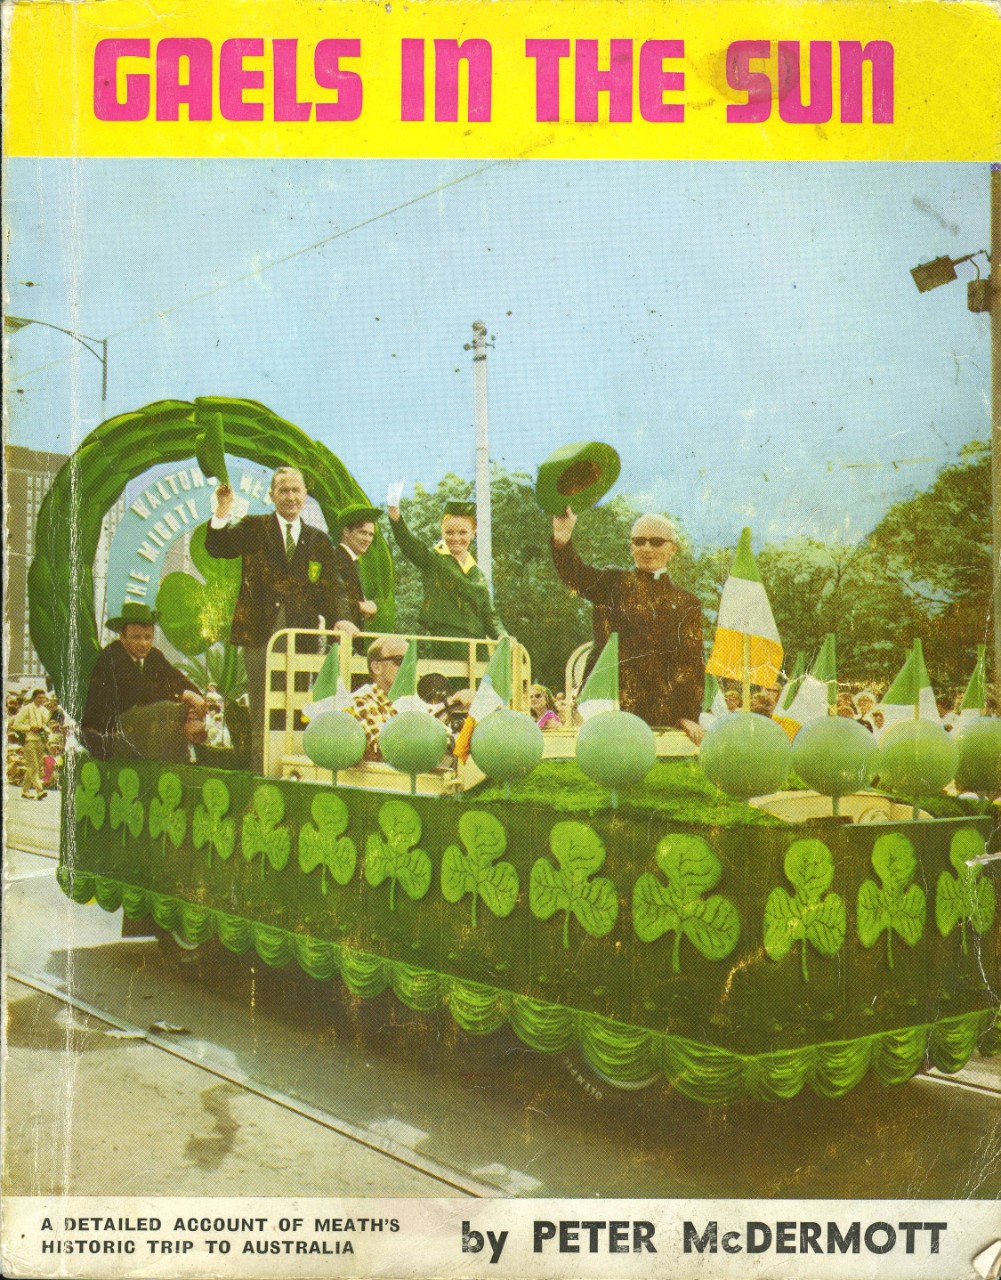 The cover of a publication